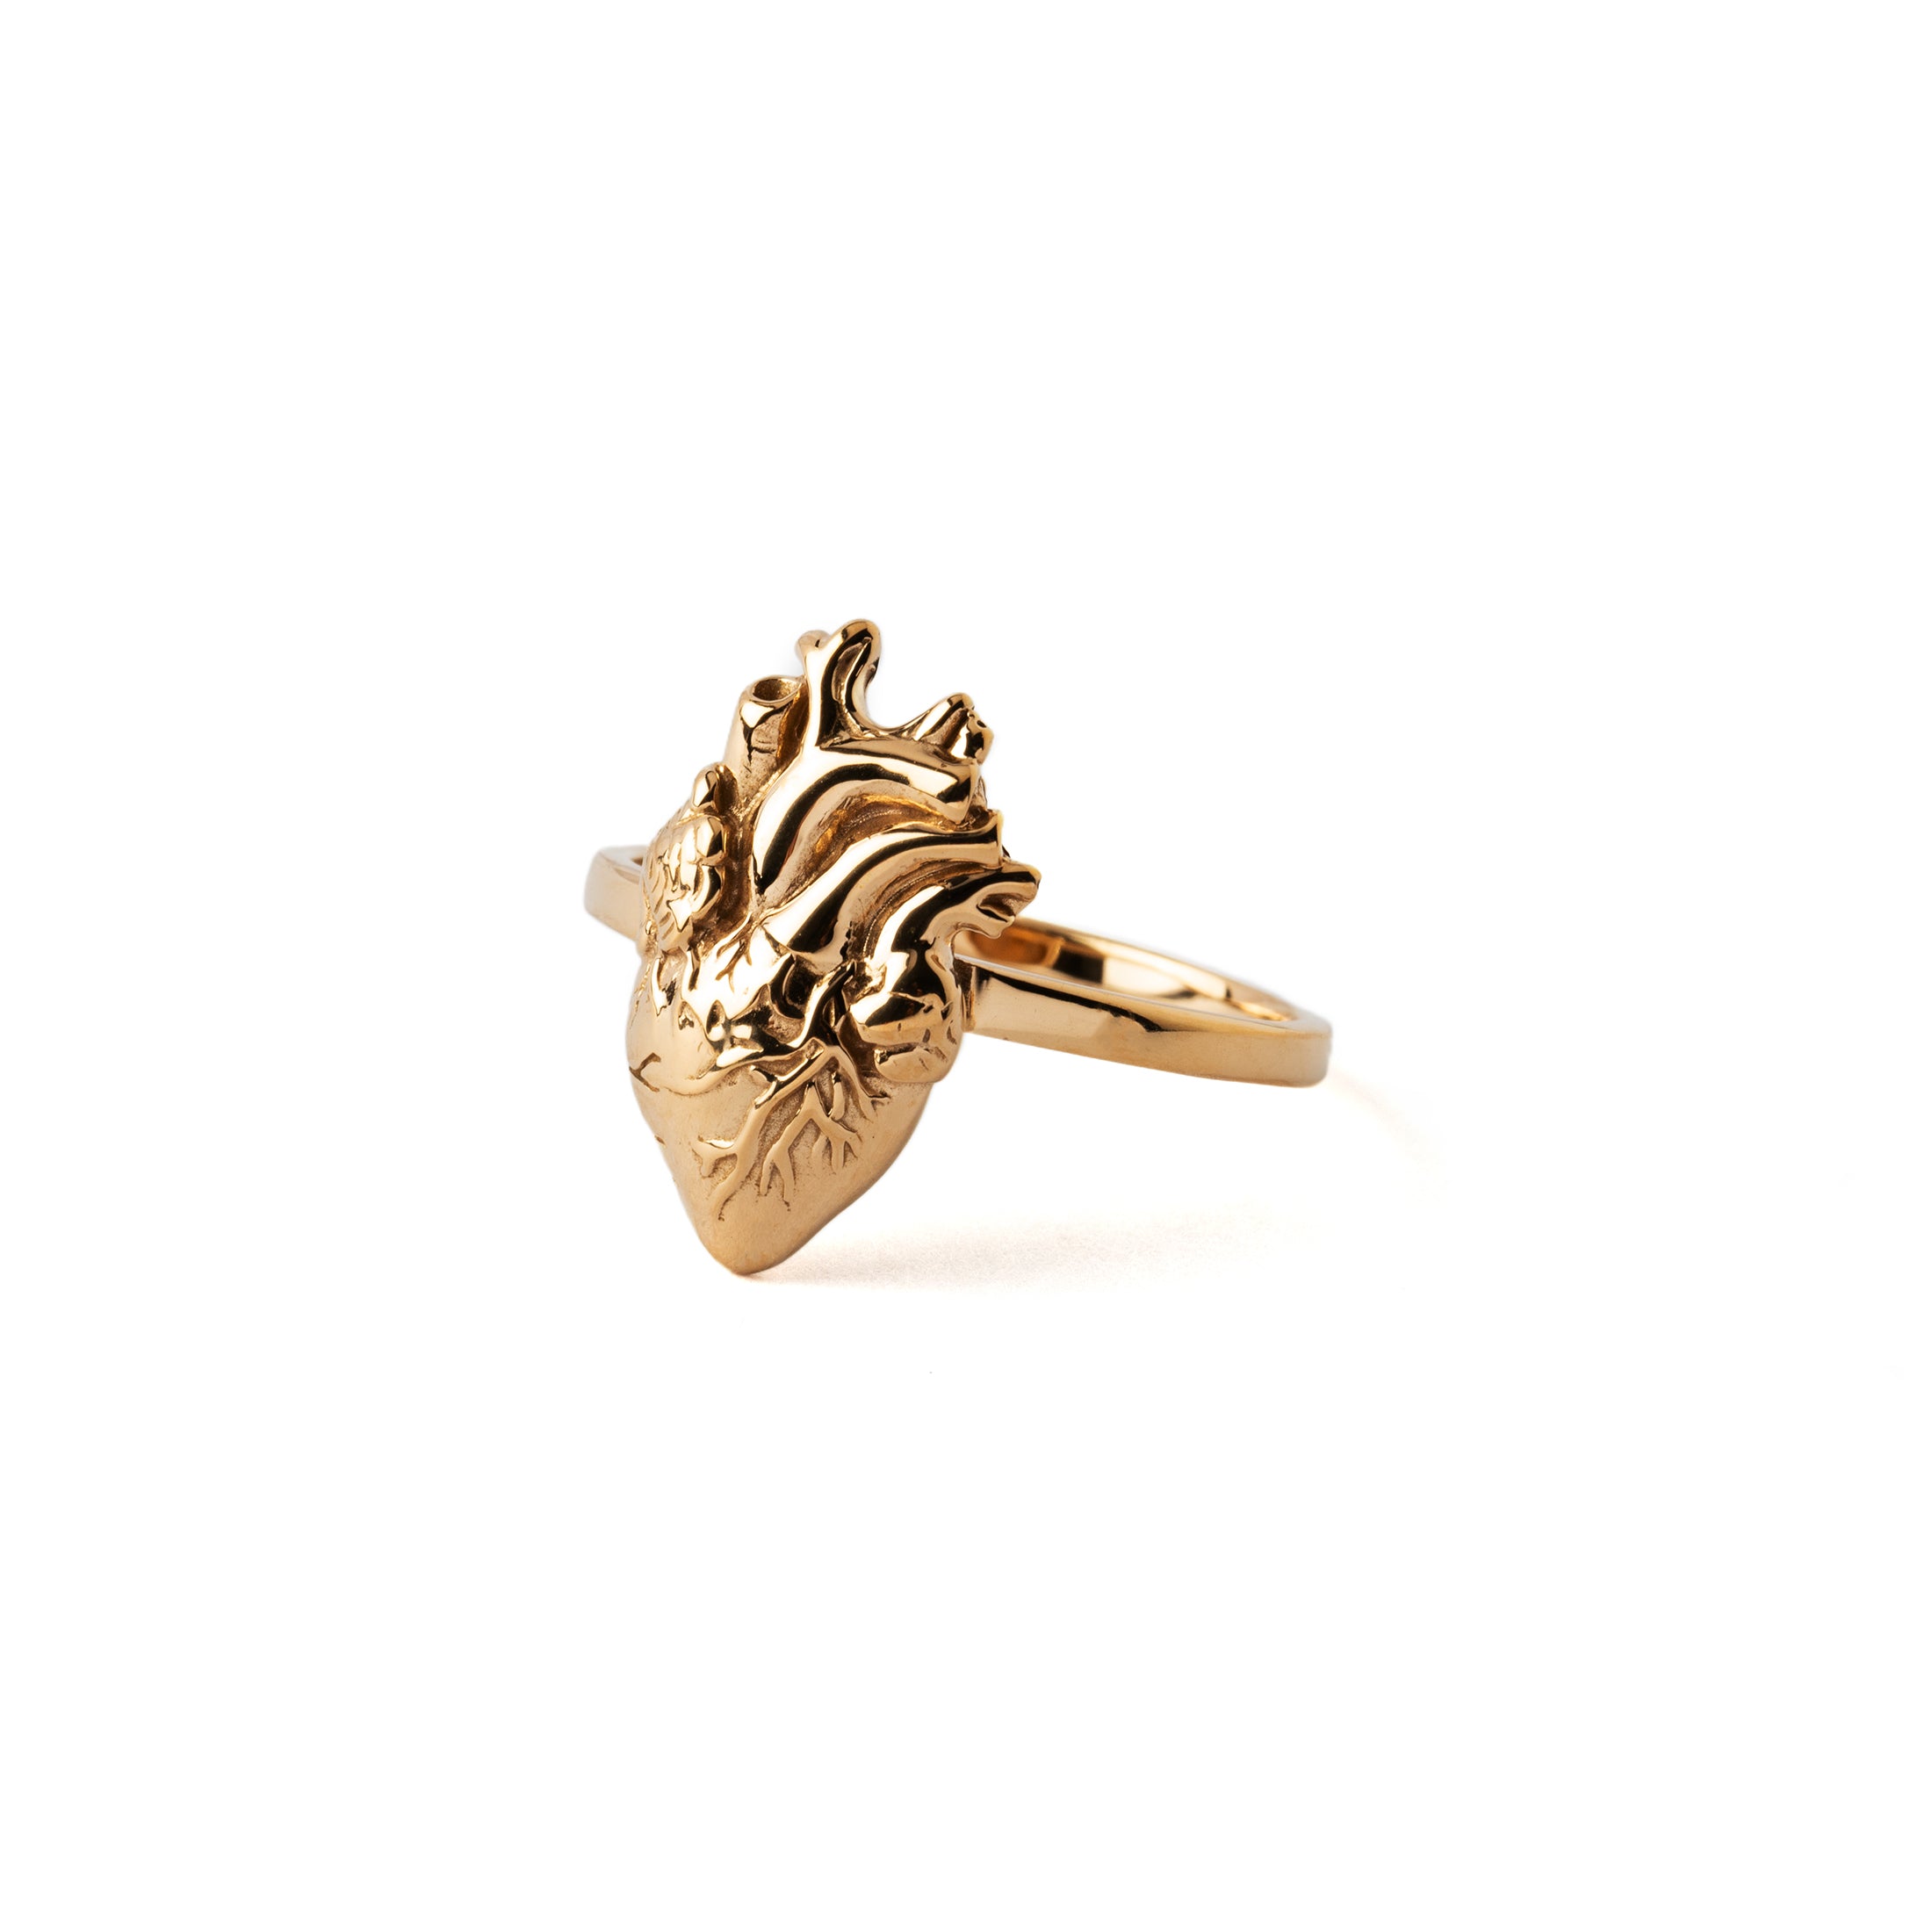 Anatomic Bronze Heart Ring left side view